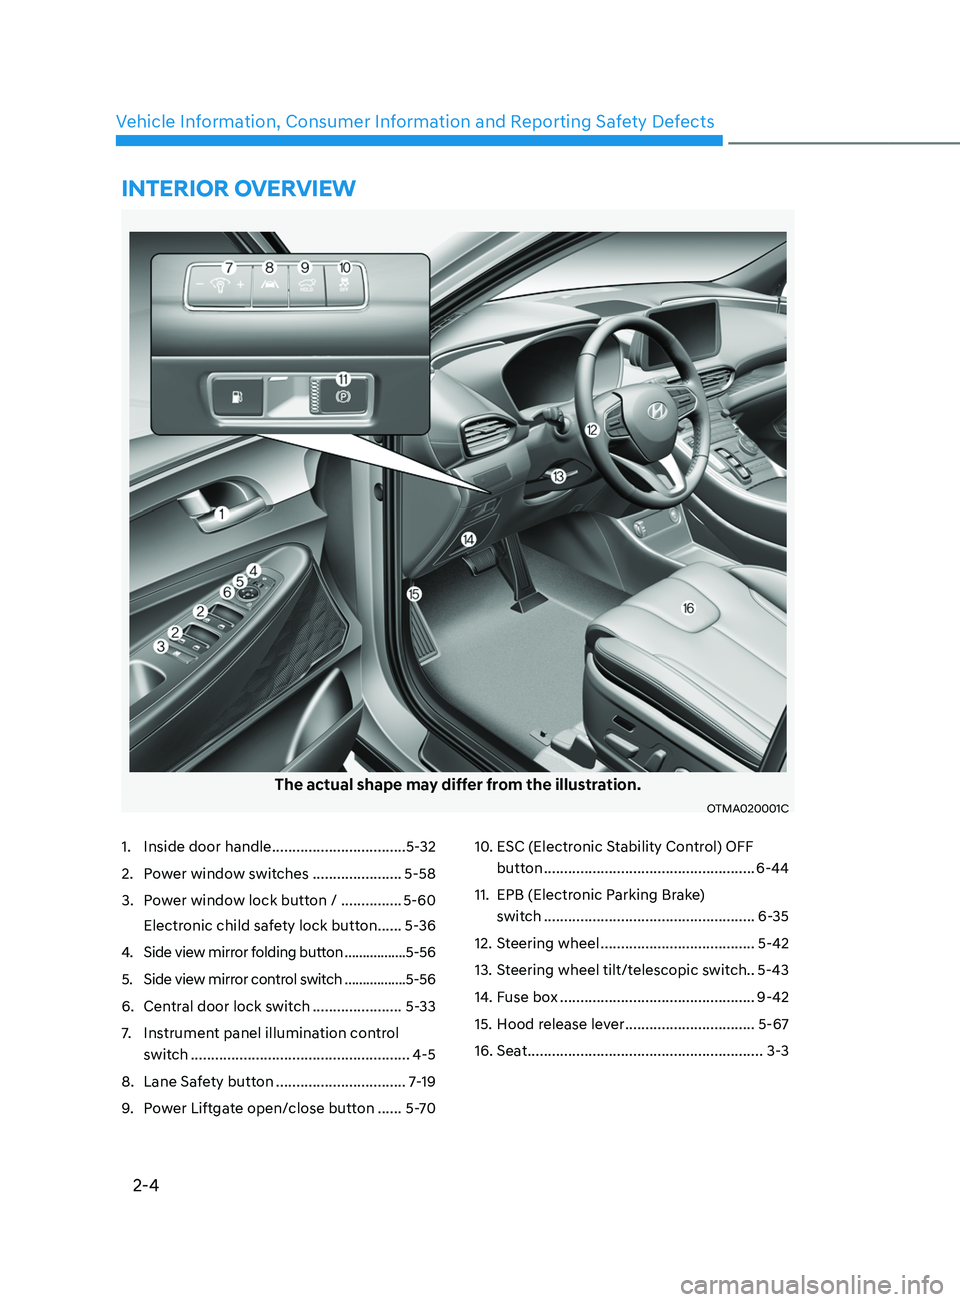 HYUNDAI SANTA FE LIMITED 2021  Owners Manual 2-4
Vehicle Information, Consumer Information and Reporting Safety Defects
1. Inside door handle .................................
5- 32
2.
 Po
 wer window switches
 ...................... 5-58
3.
 Po